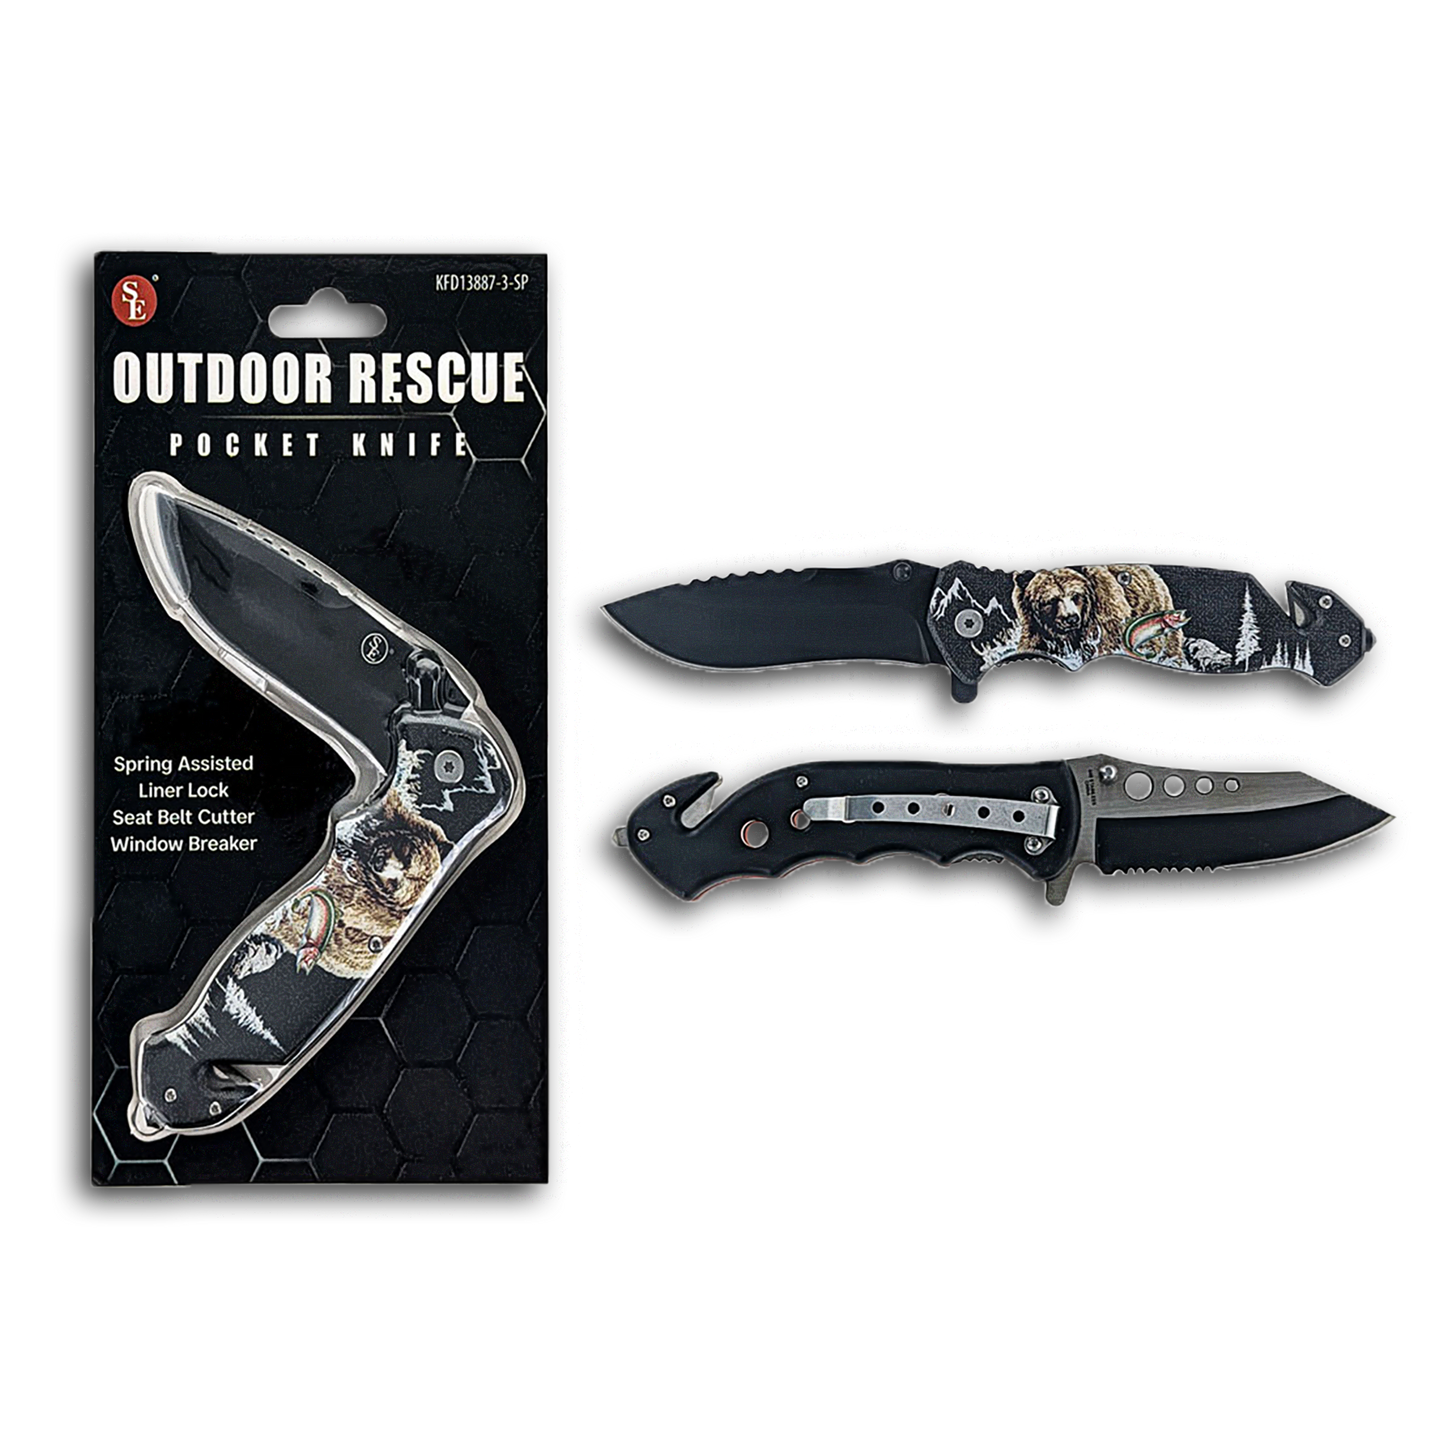 OUTDOOR RESCUE POCKET KNIFE